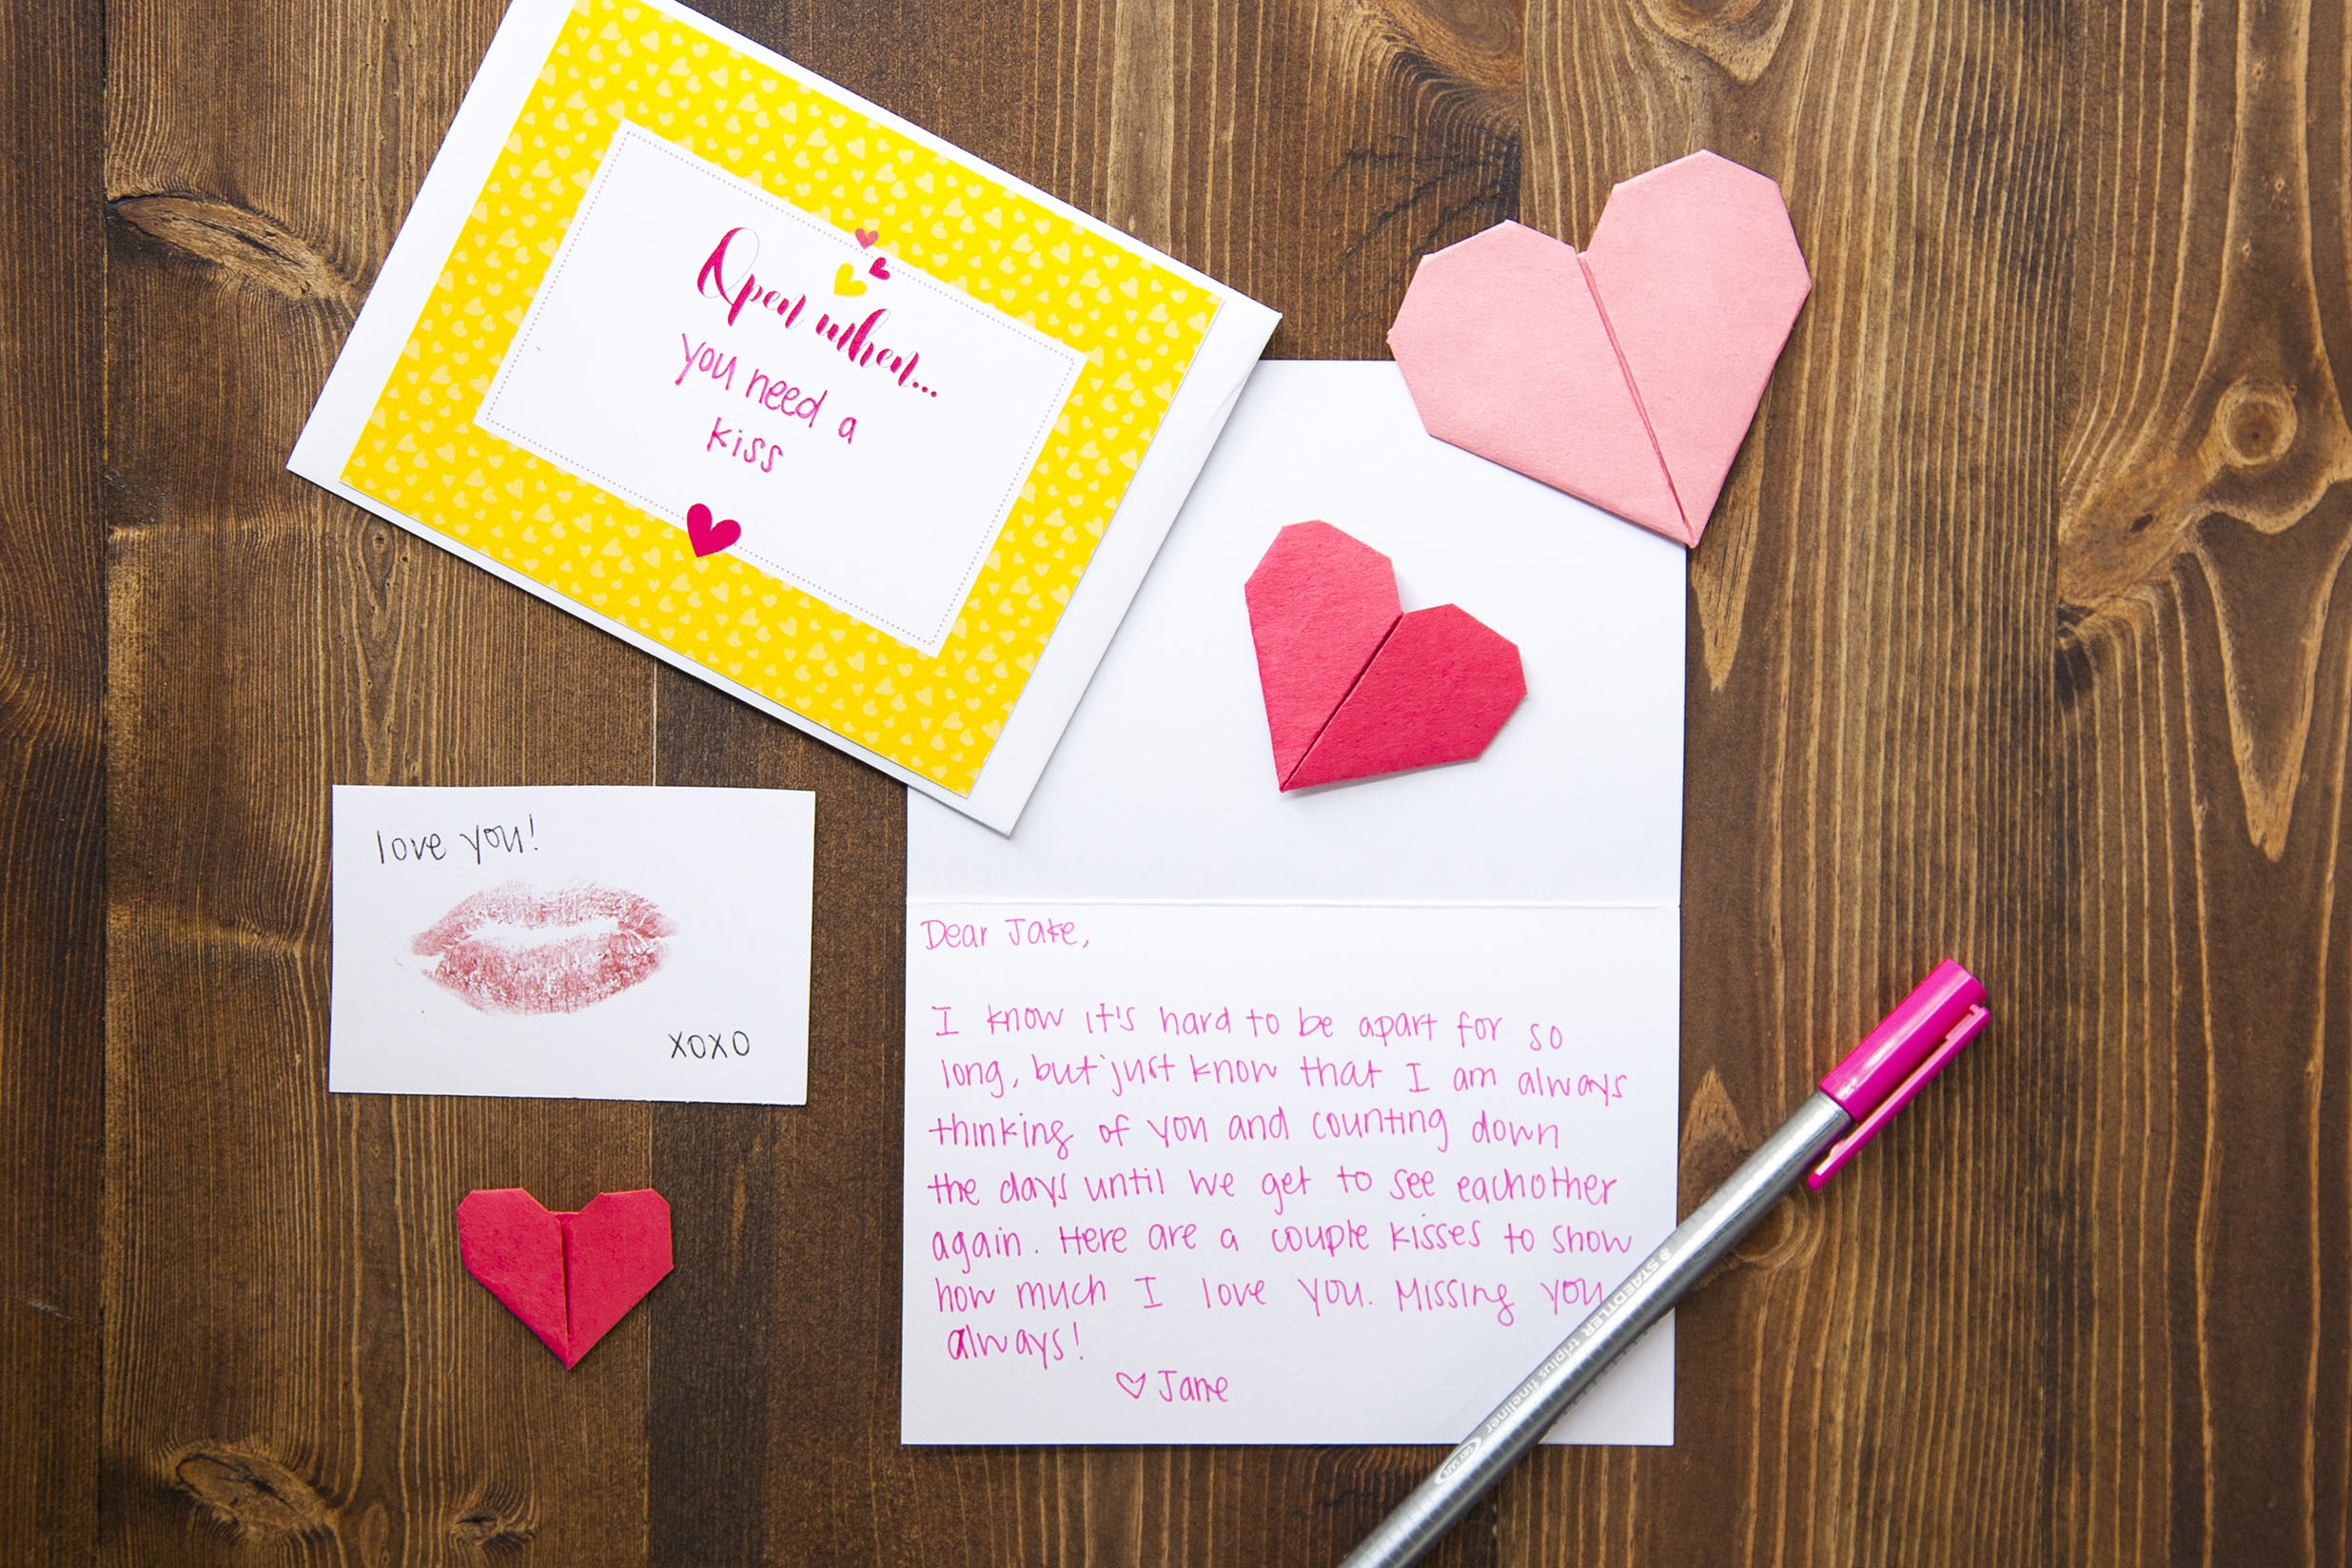 Open When Letters: 21 Ideas + Printables - Shari